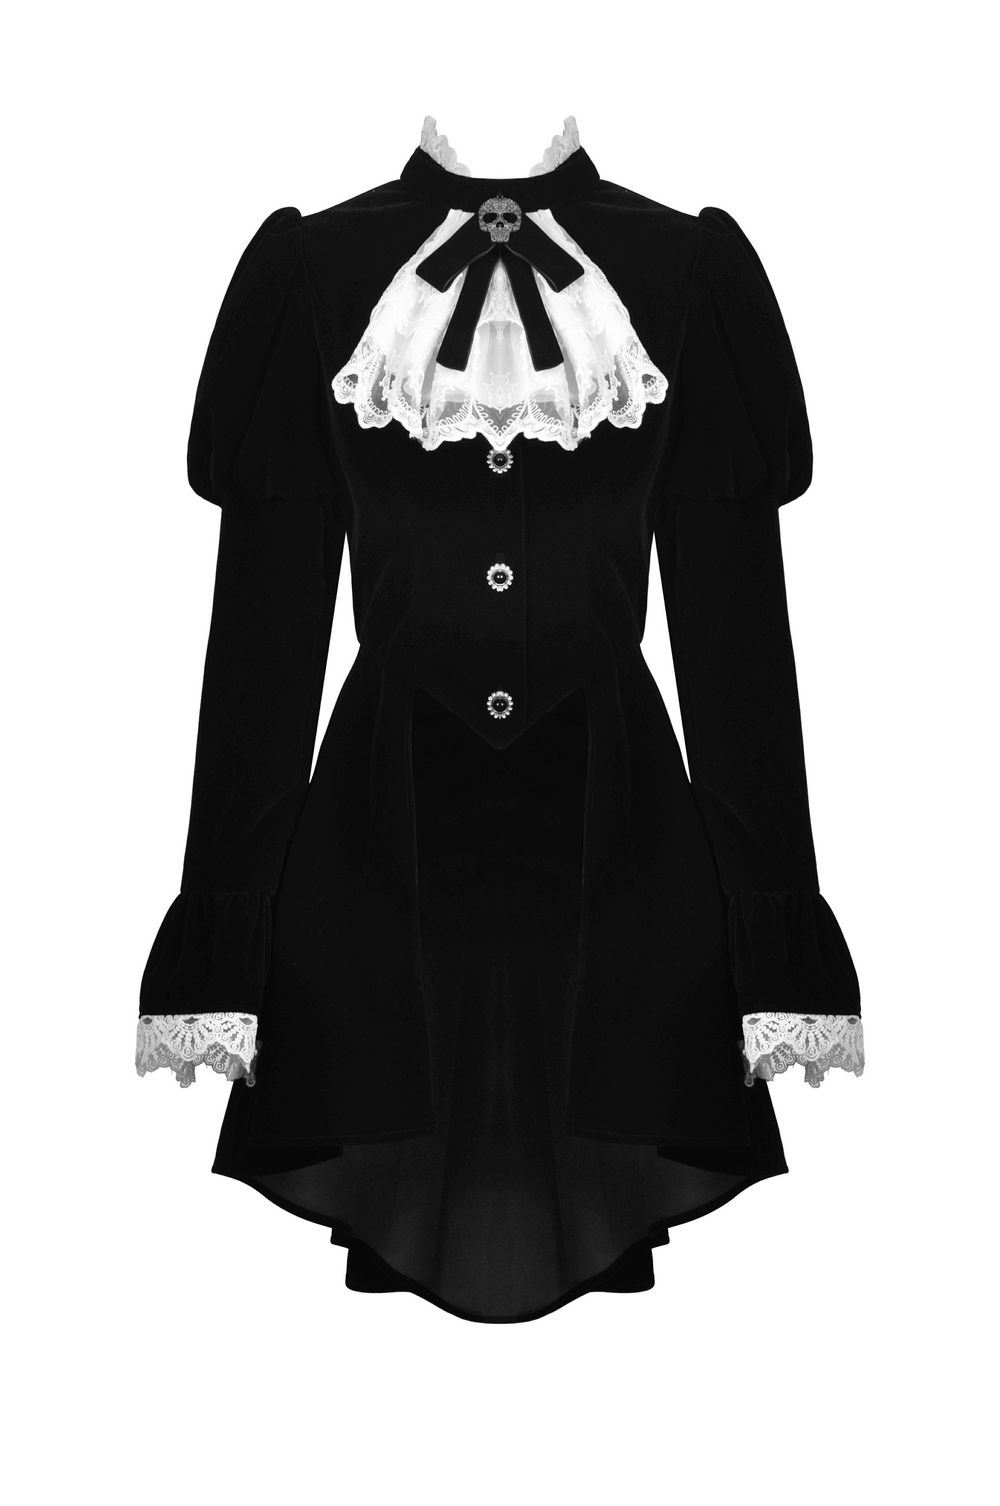 Black Velvet Gothic Coat with White Lace Collar and Cuffs